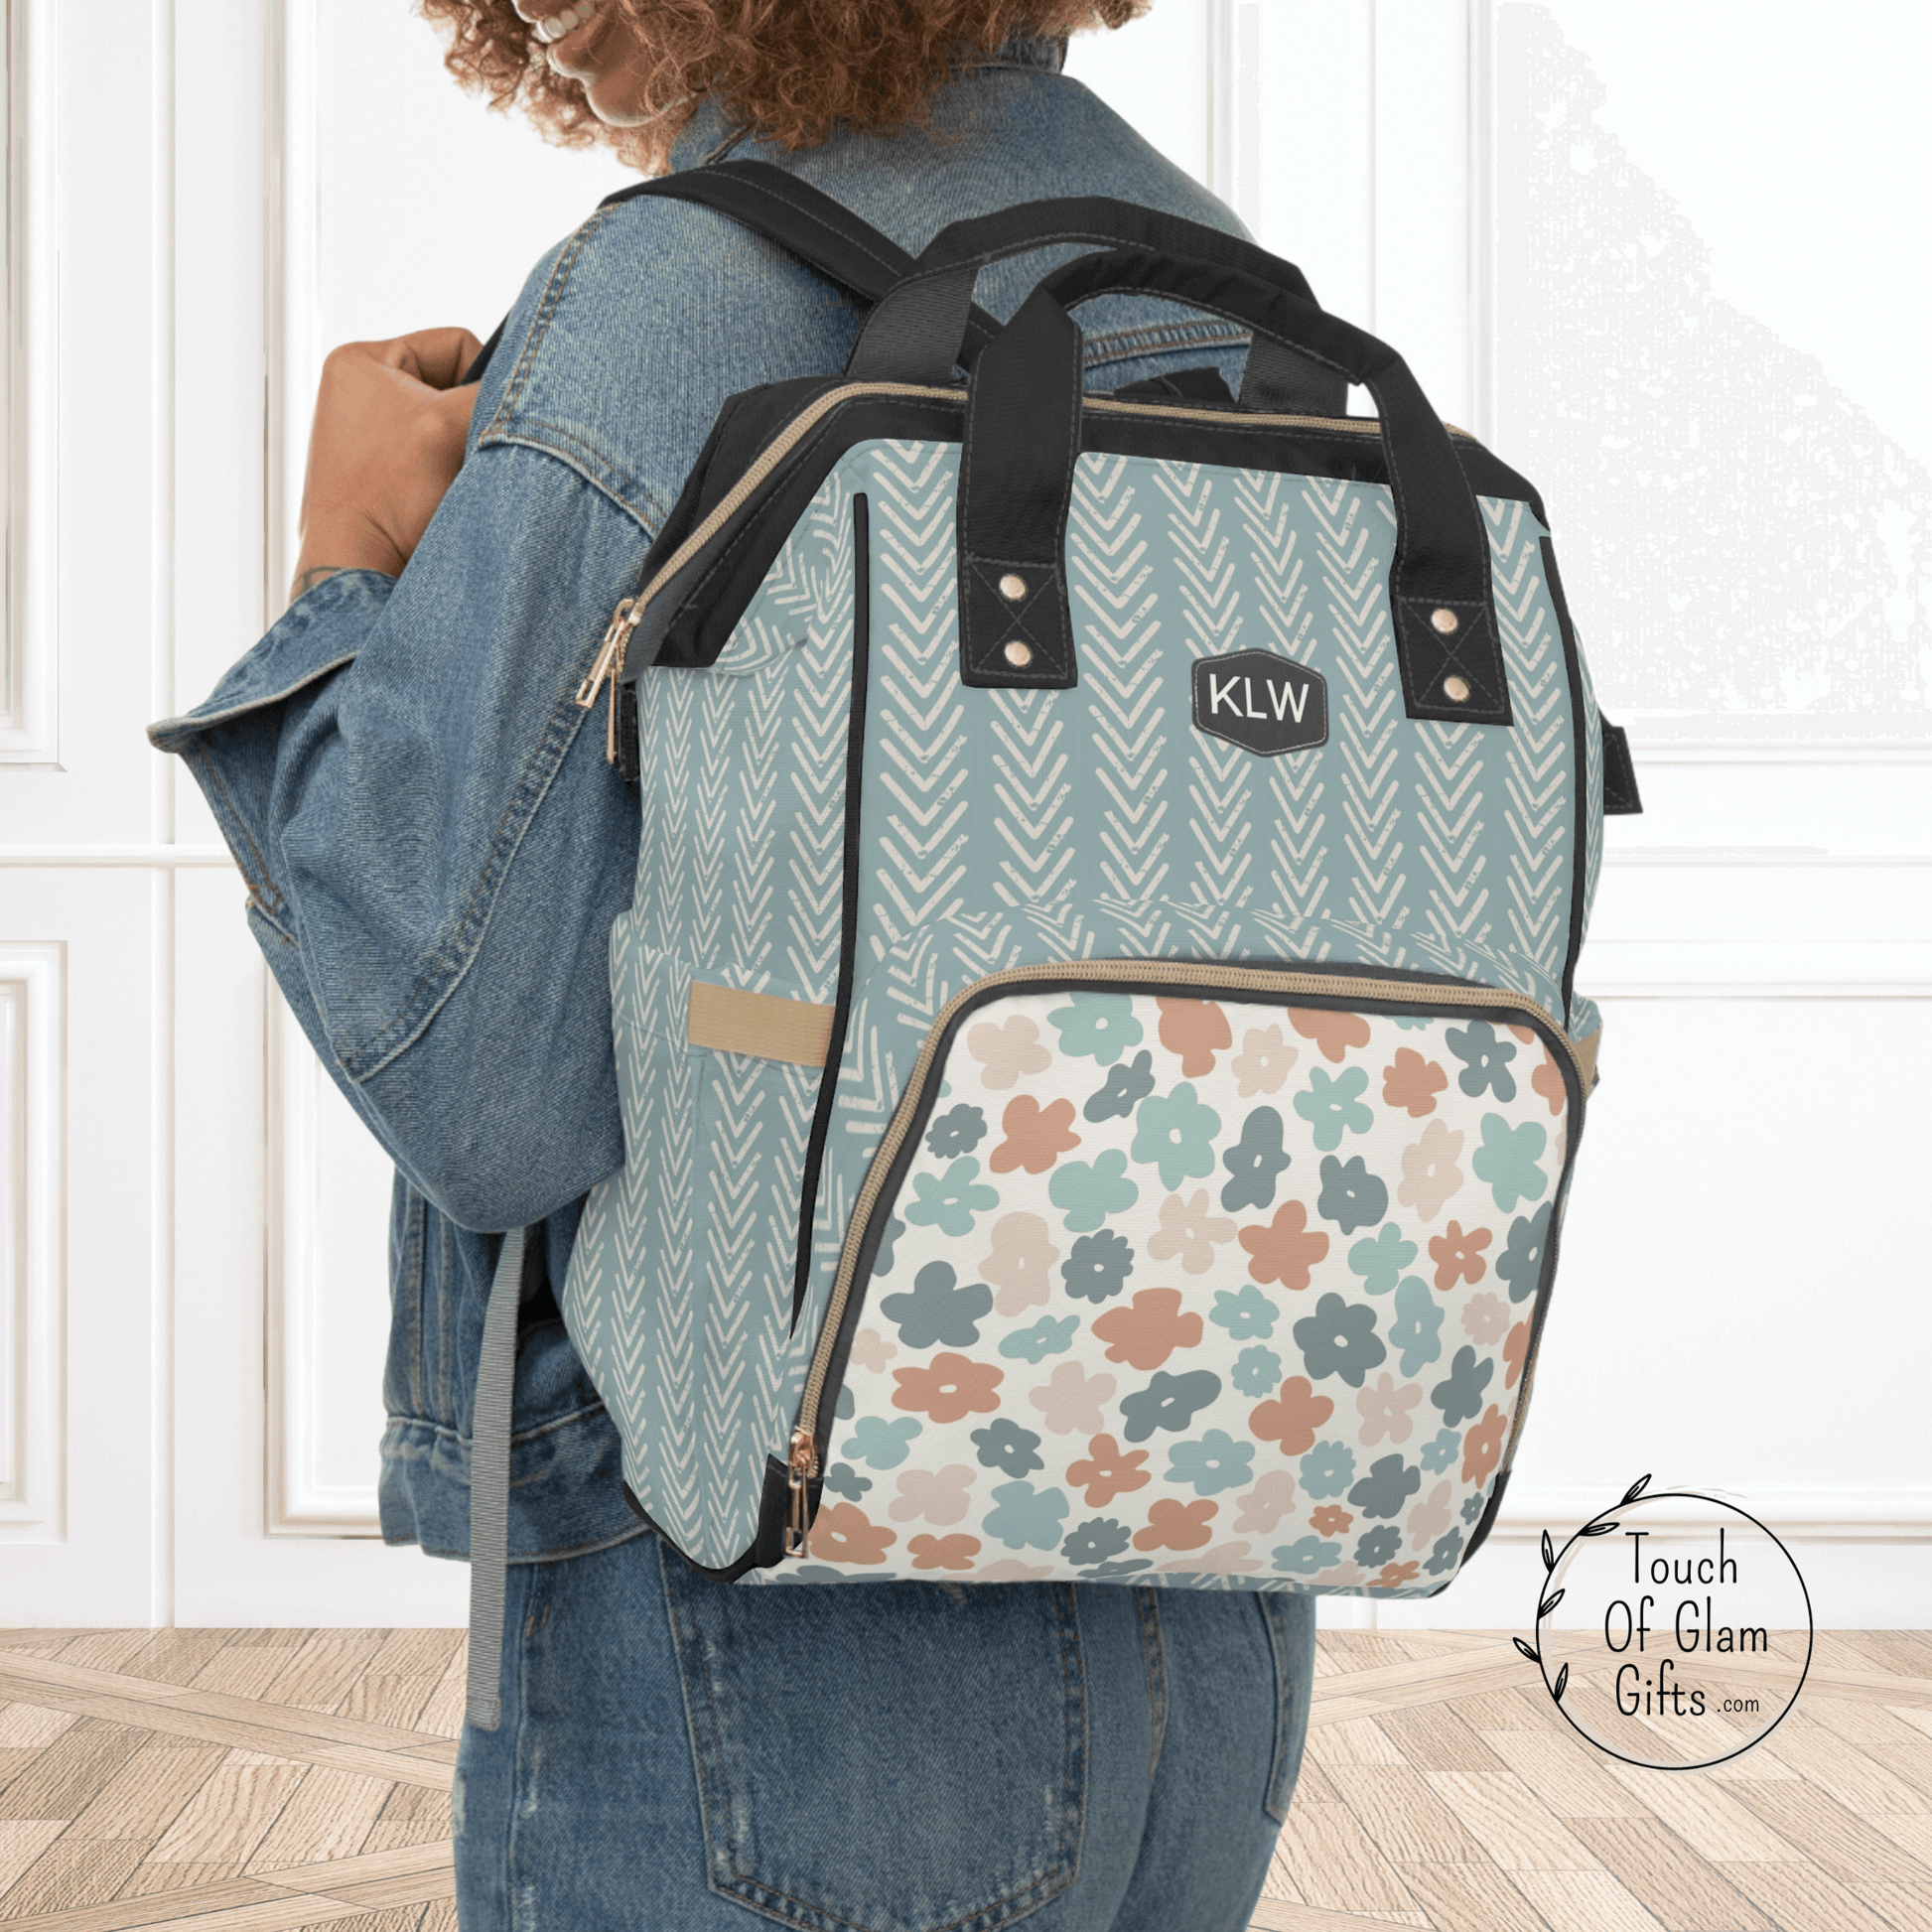 Our Boho Diaper bag backpack has a sage green fabric with distressed arrows and the front outer zippered pocket has colorful boho flowers. This diaper bag is shown as a diaper backpack with the black monogrammed patch.